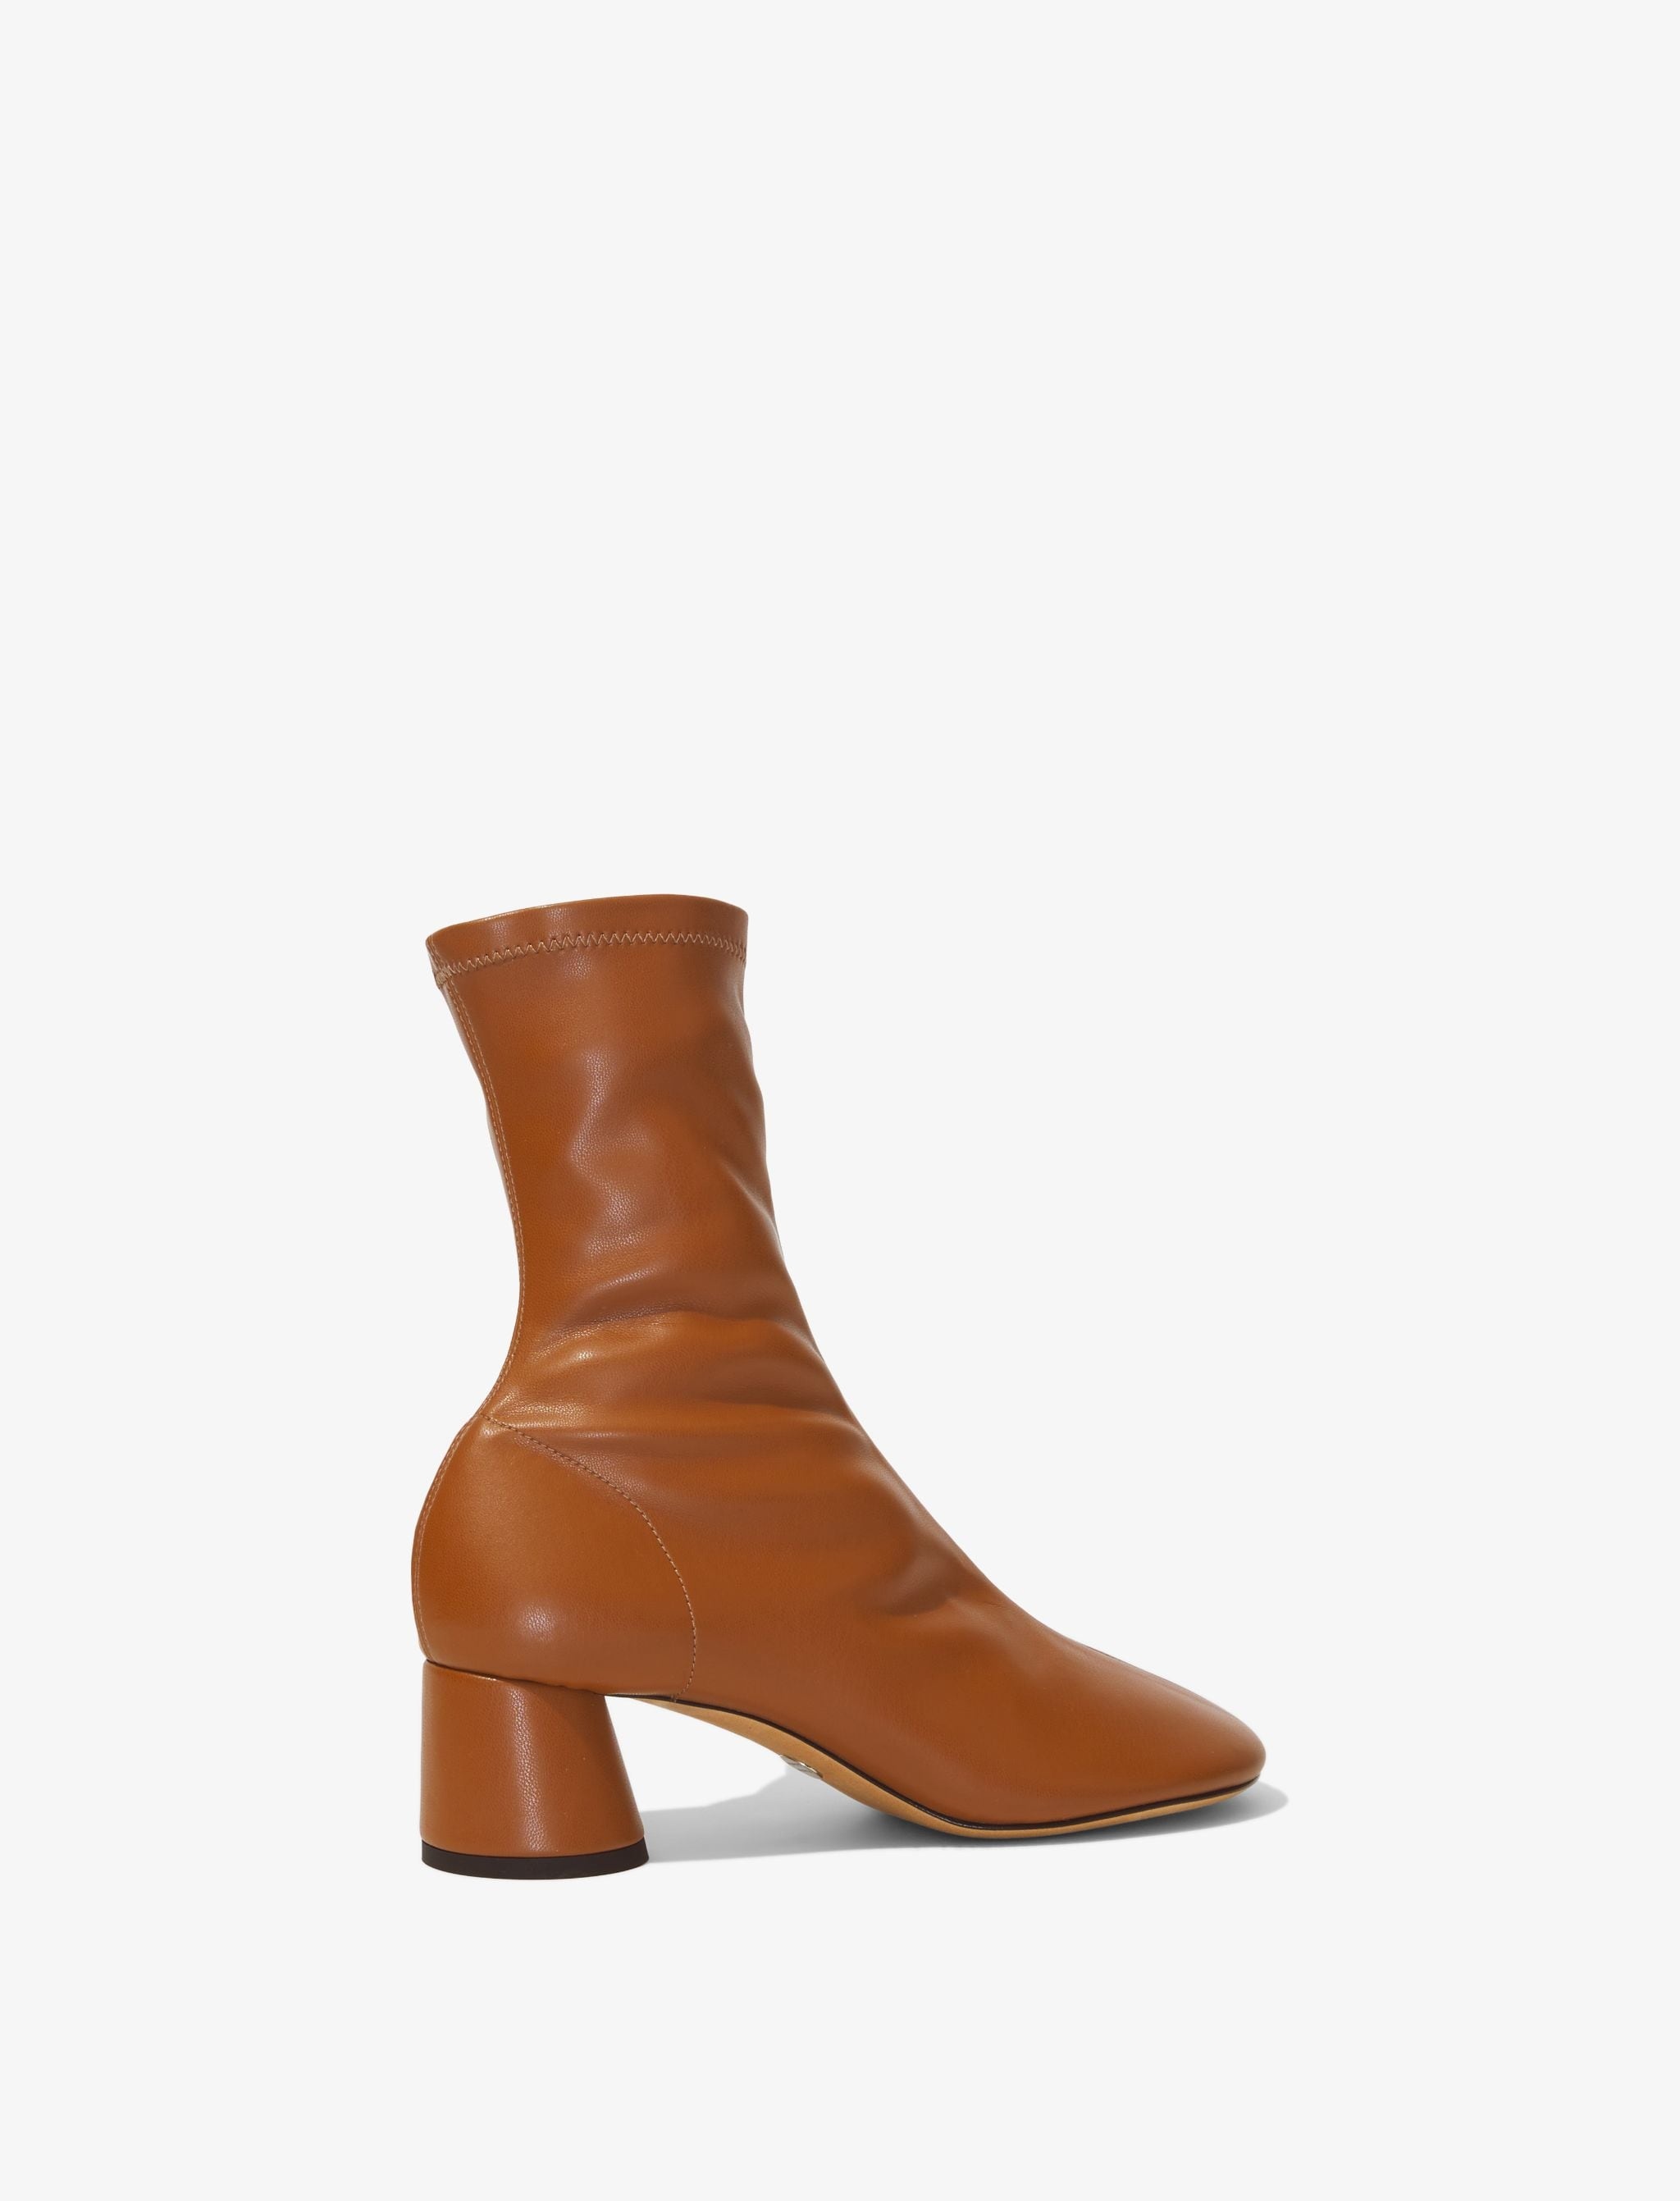 Glove Stretch Ankle Boots - 3